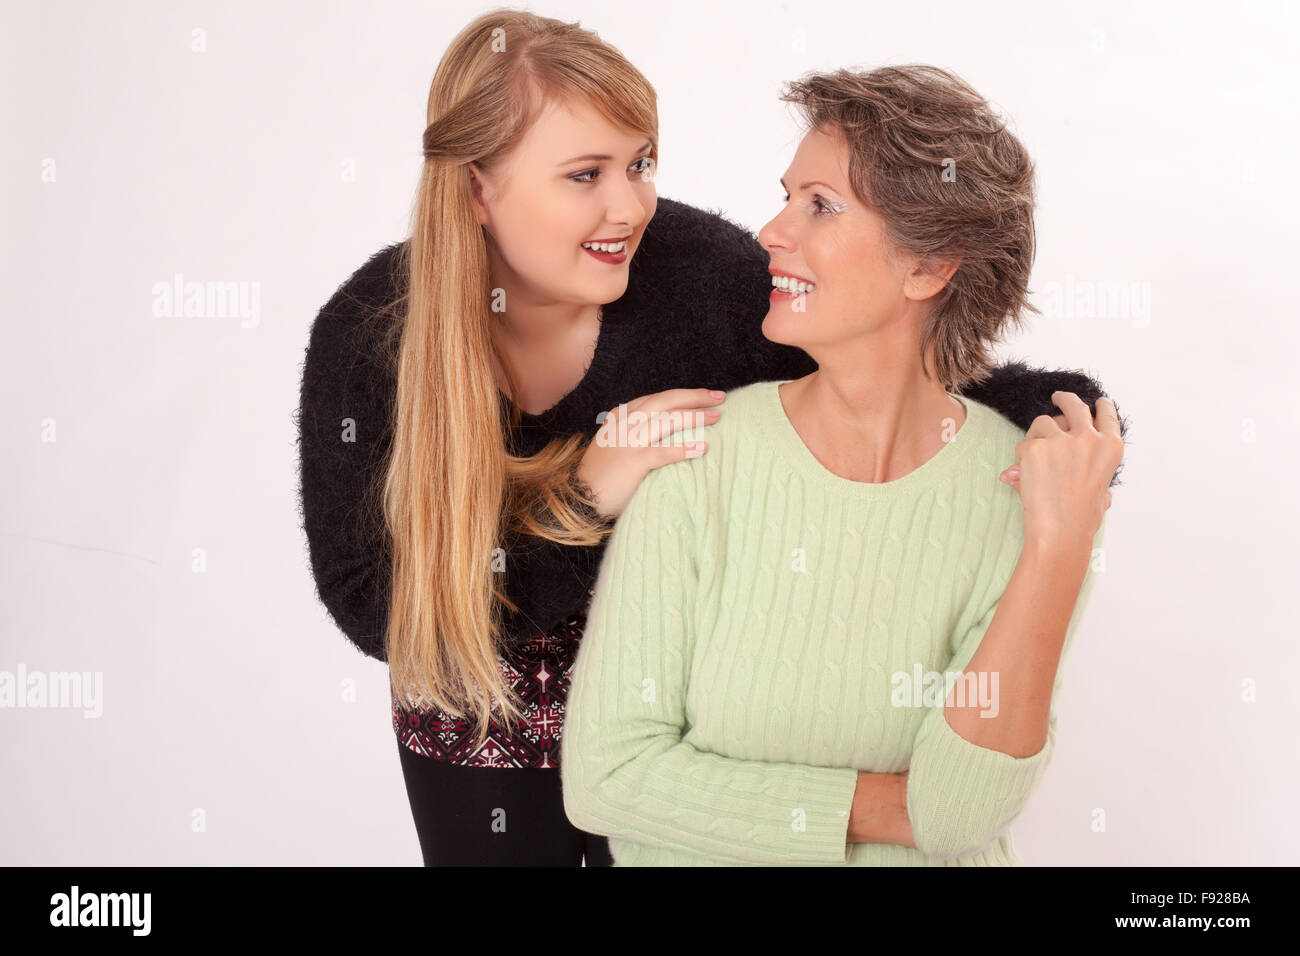 She is the favorite grandmother Stock Photo